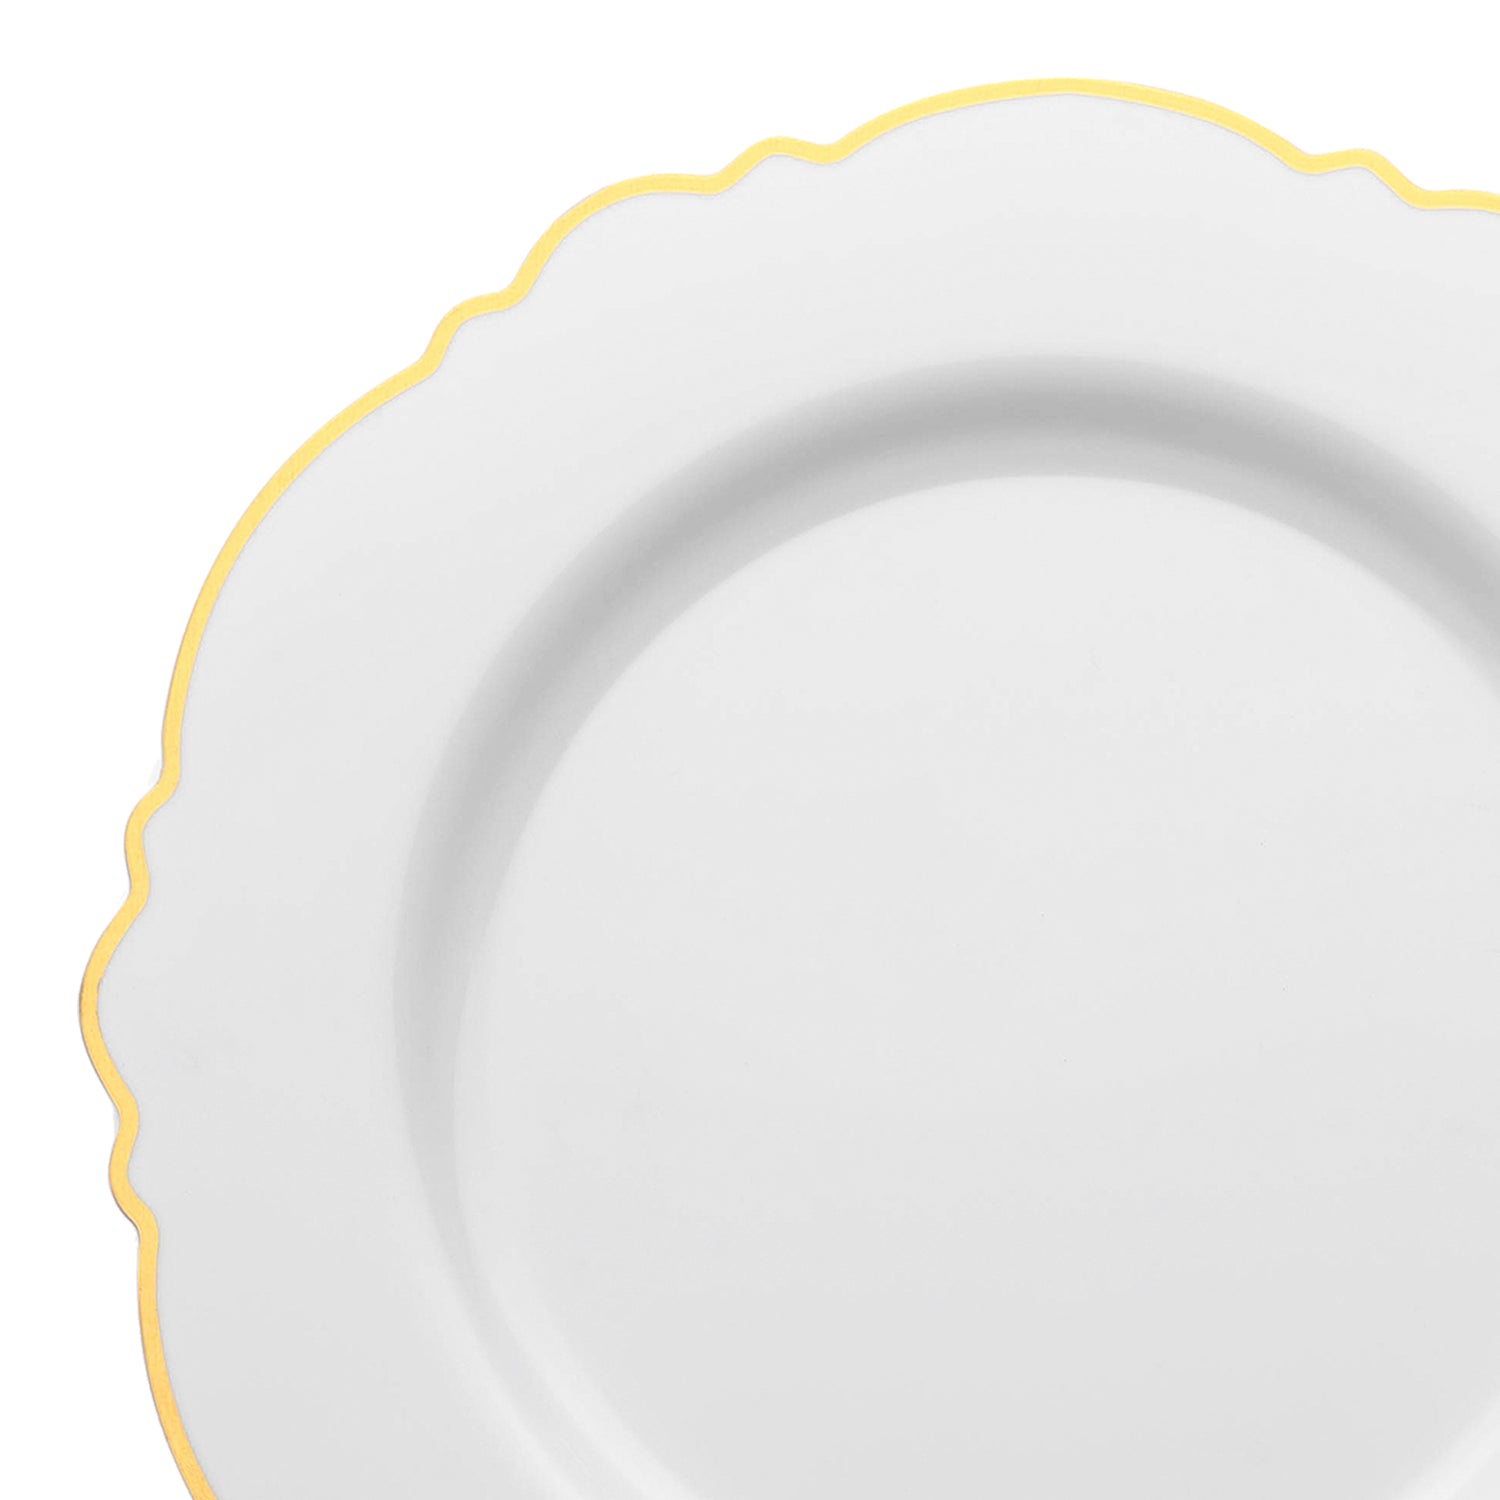 White with Gold Rim Round Blossom Disposable Plastic Dinner Plates (10.25") | The Kaya Collection